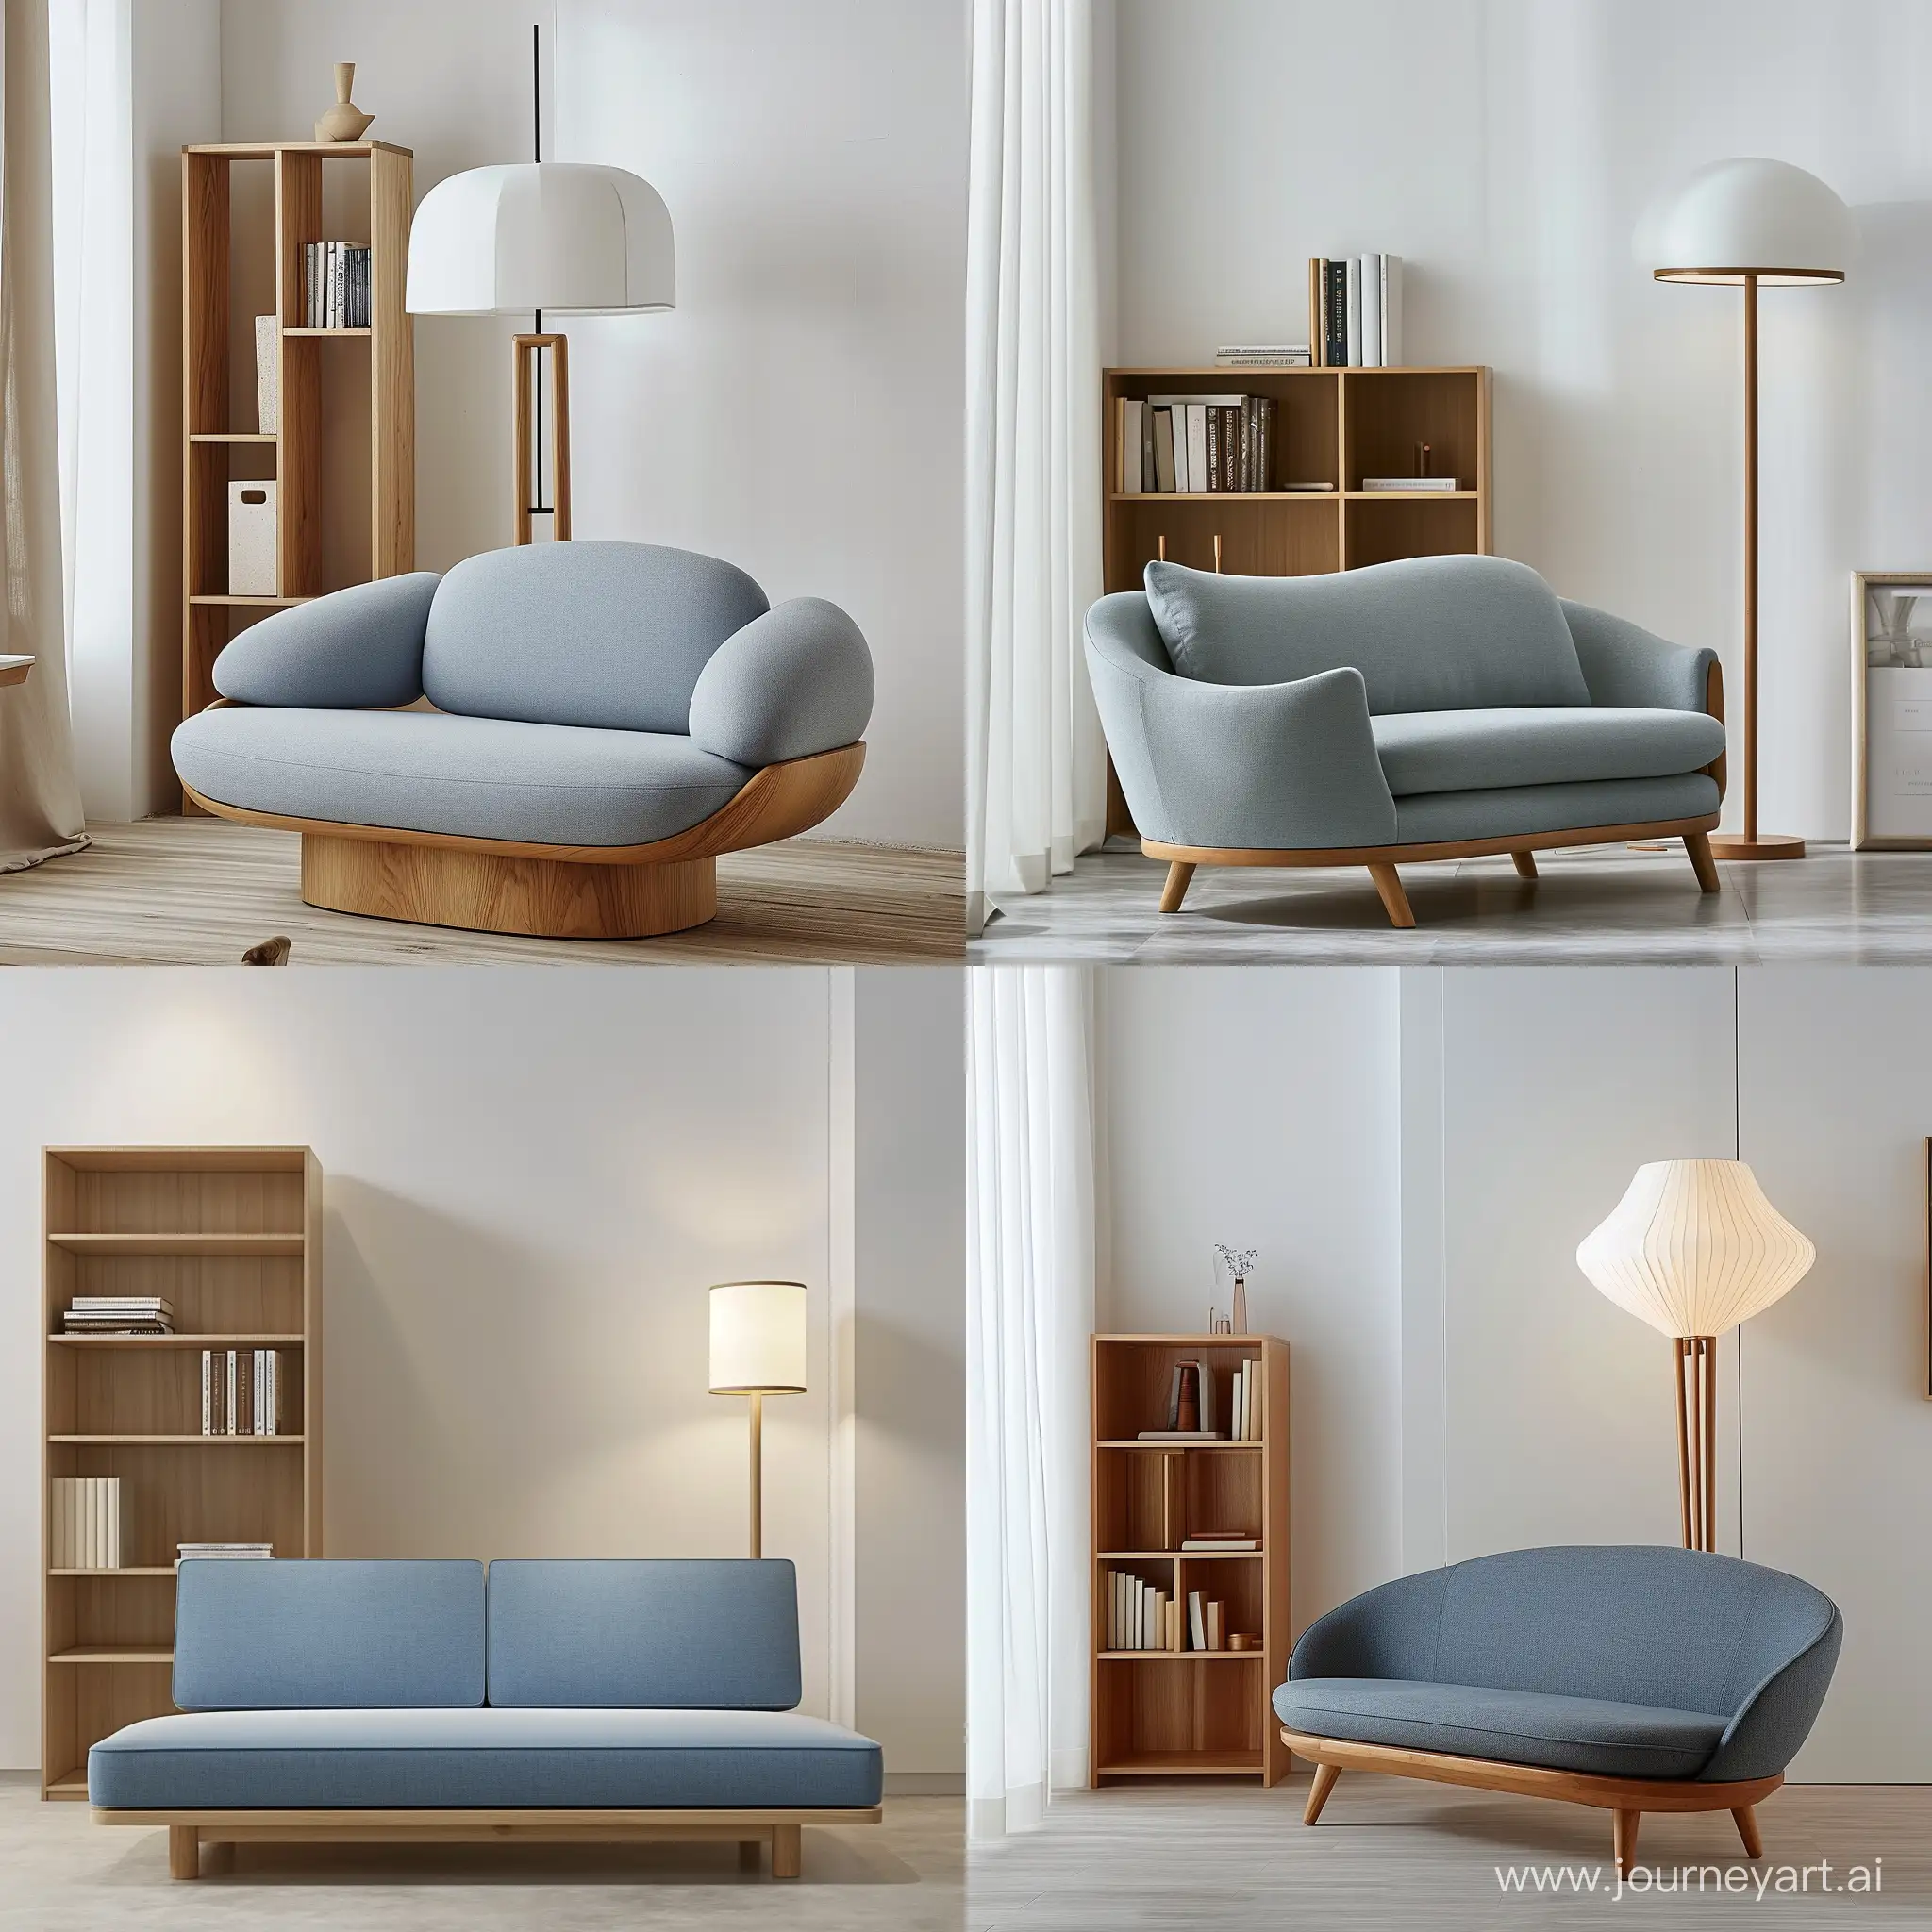 Modern-Blue-Beech-Wood-Sofa-in-Whitedominated-Living-Space-with-Bookcase-and-Reading-Lamp